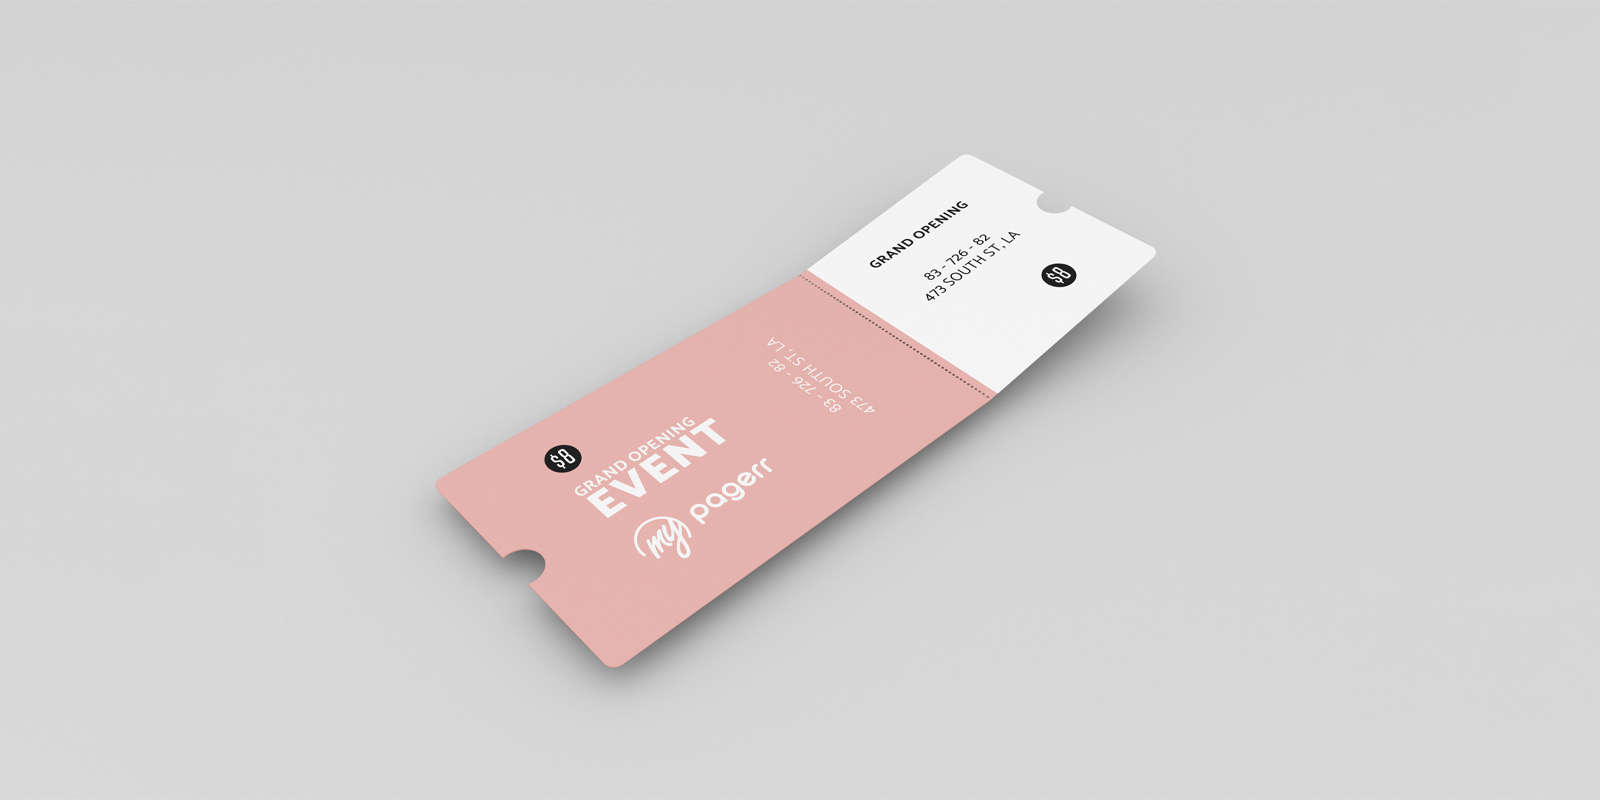 Tickets in Tallinn - Print with Pagerr